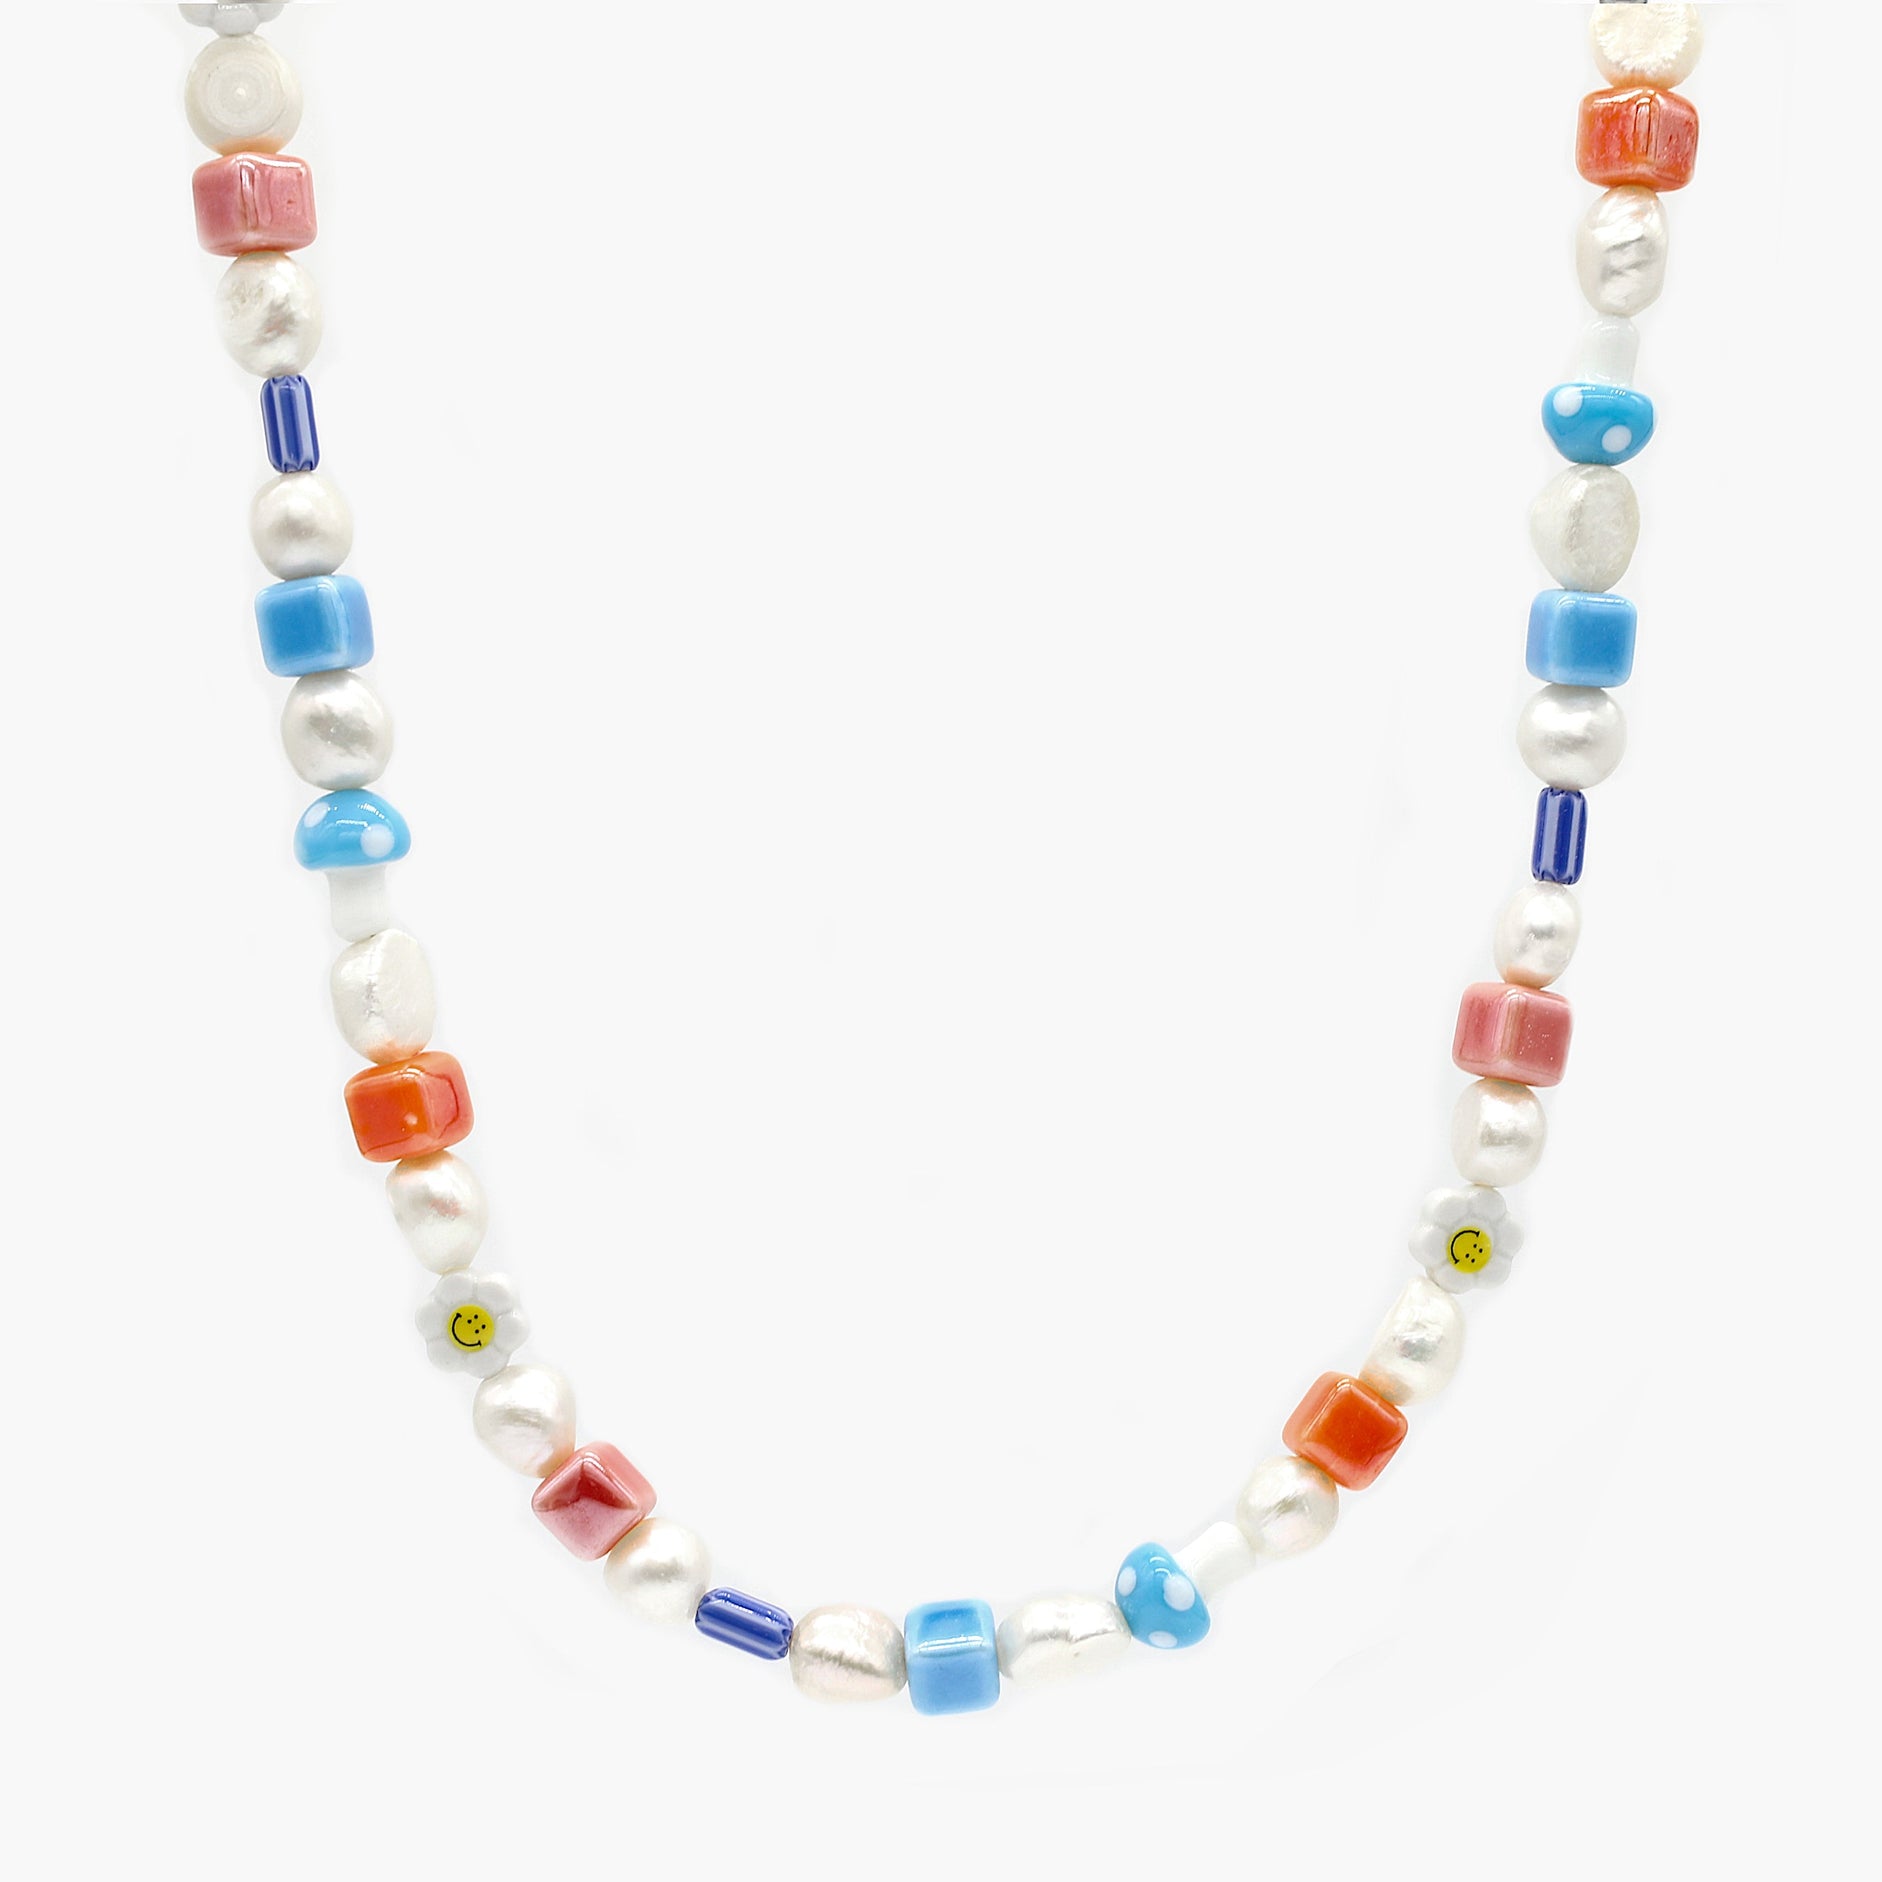 Maxi Necklace With Freshwater Pearls And Glass Beads-Necklace-Kompsós